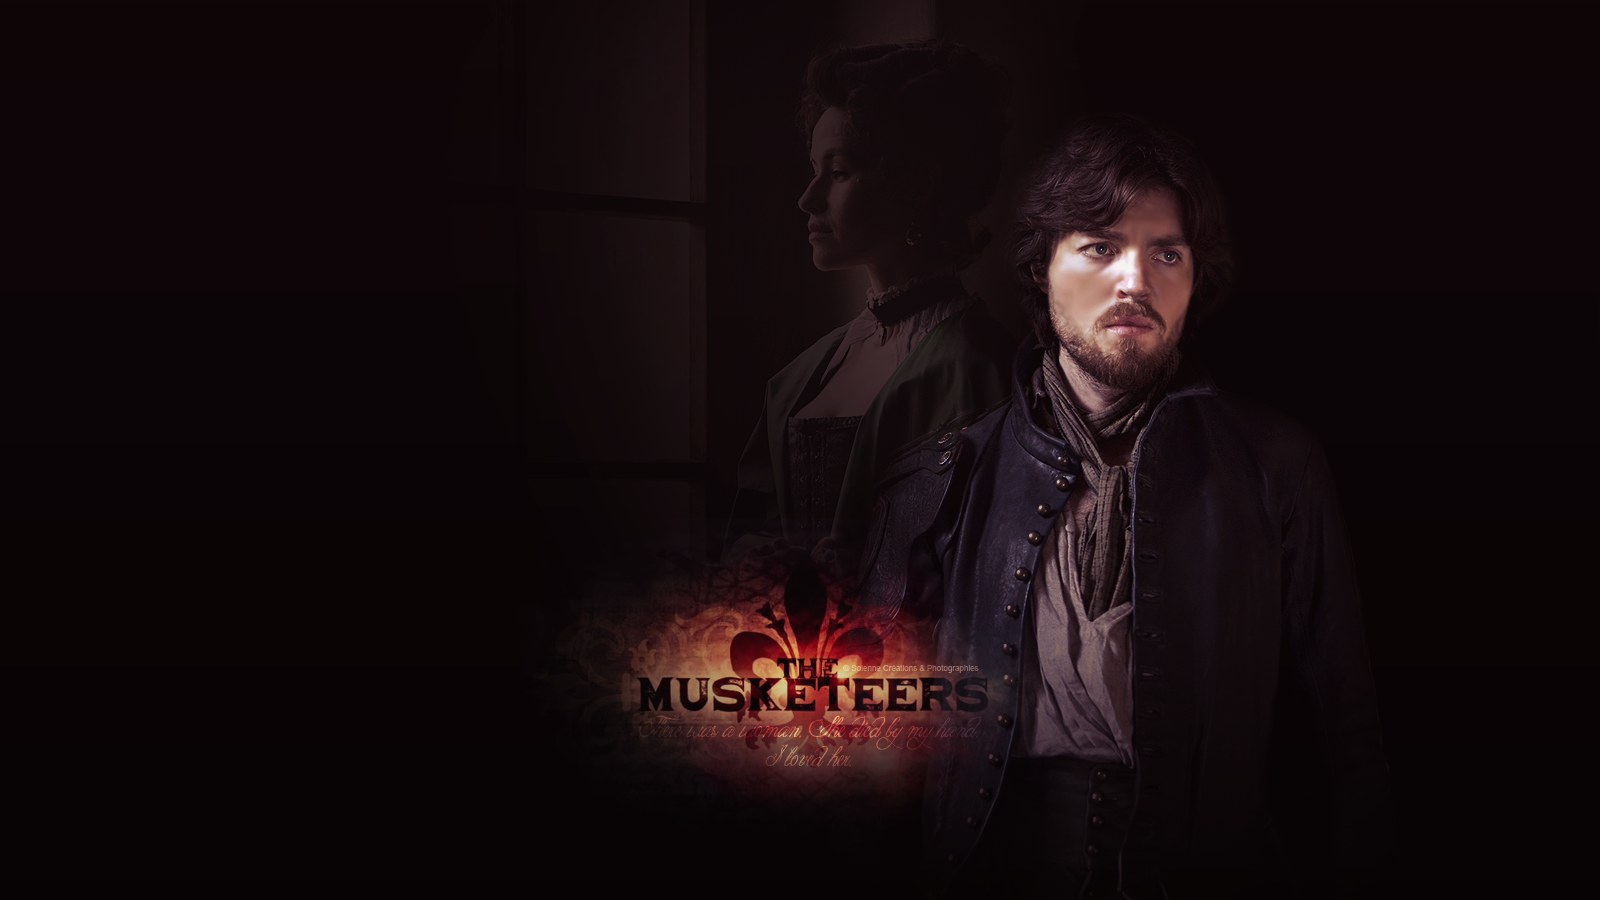 The Musketeers Background. Musketeers BBC Wallpaper, Musketeers Wallpaper and The Three Musketeers Wallpaper